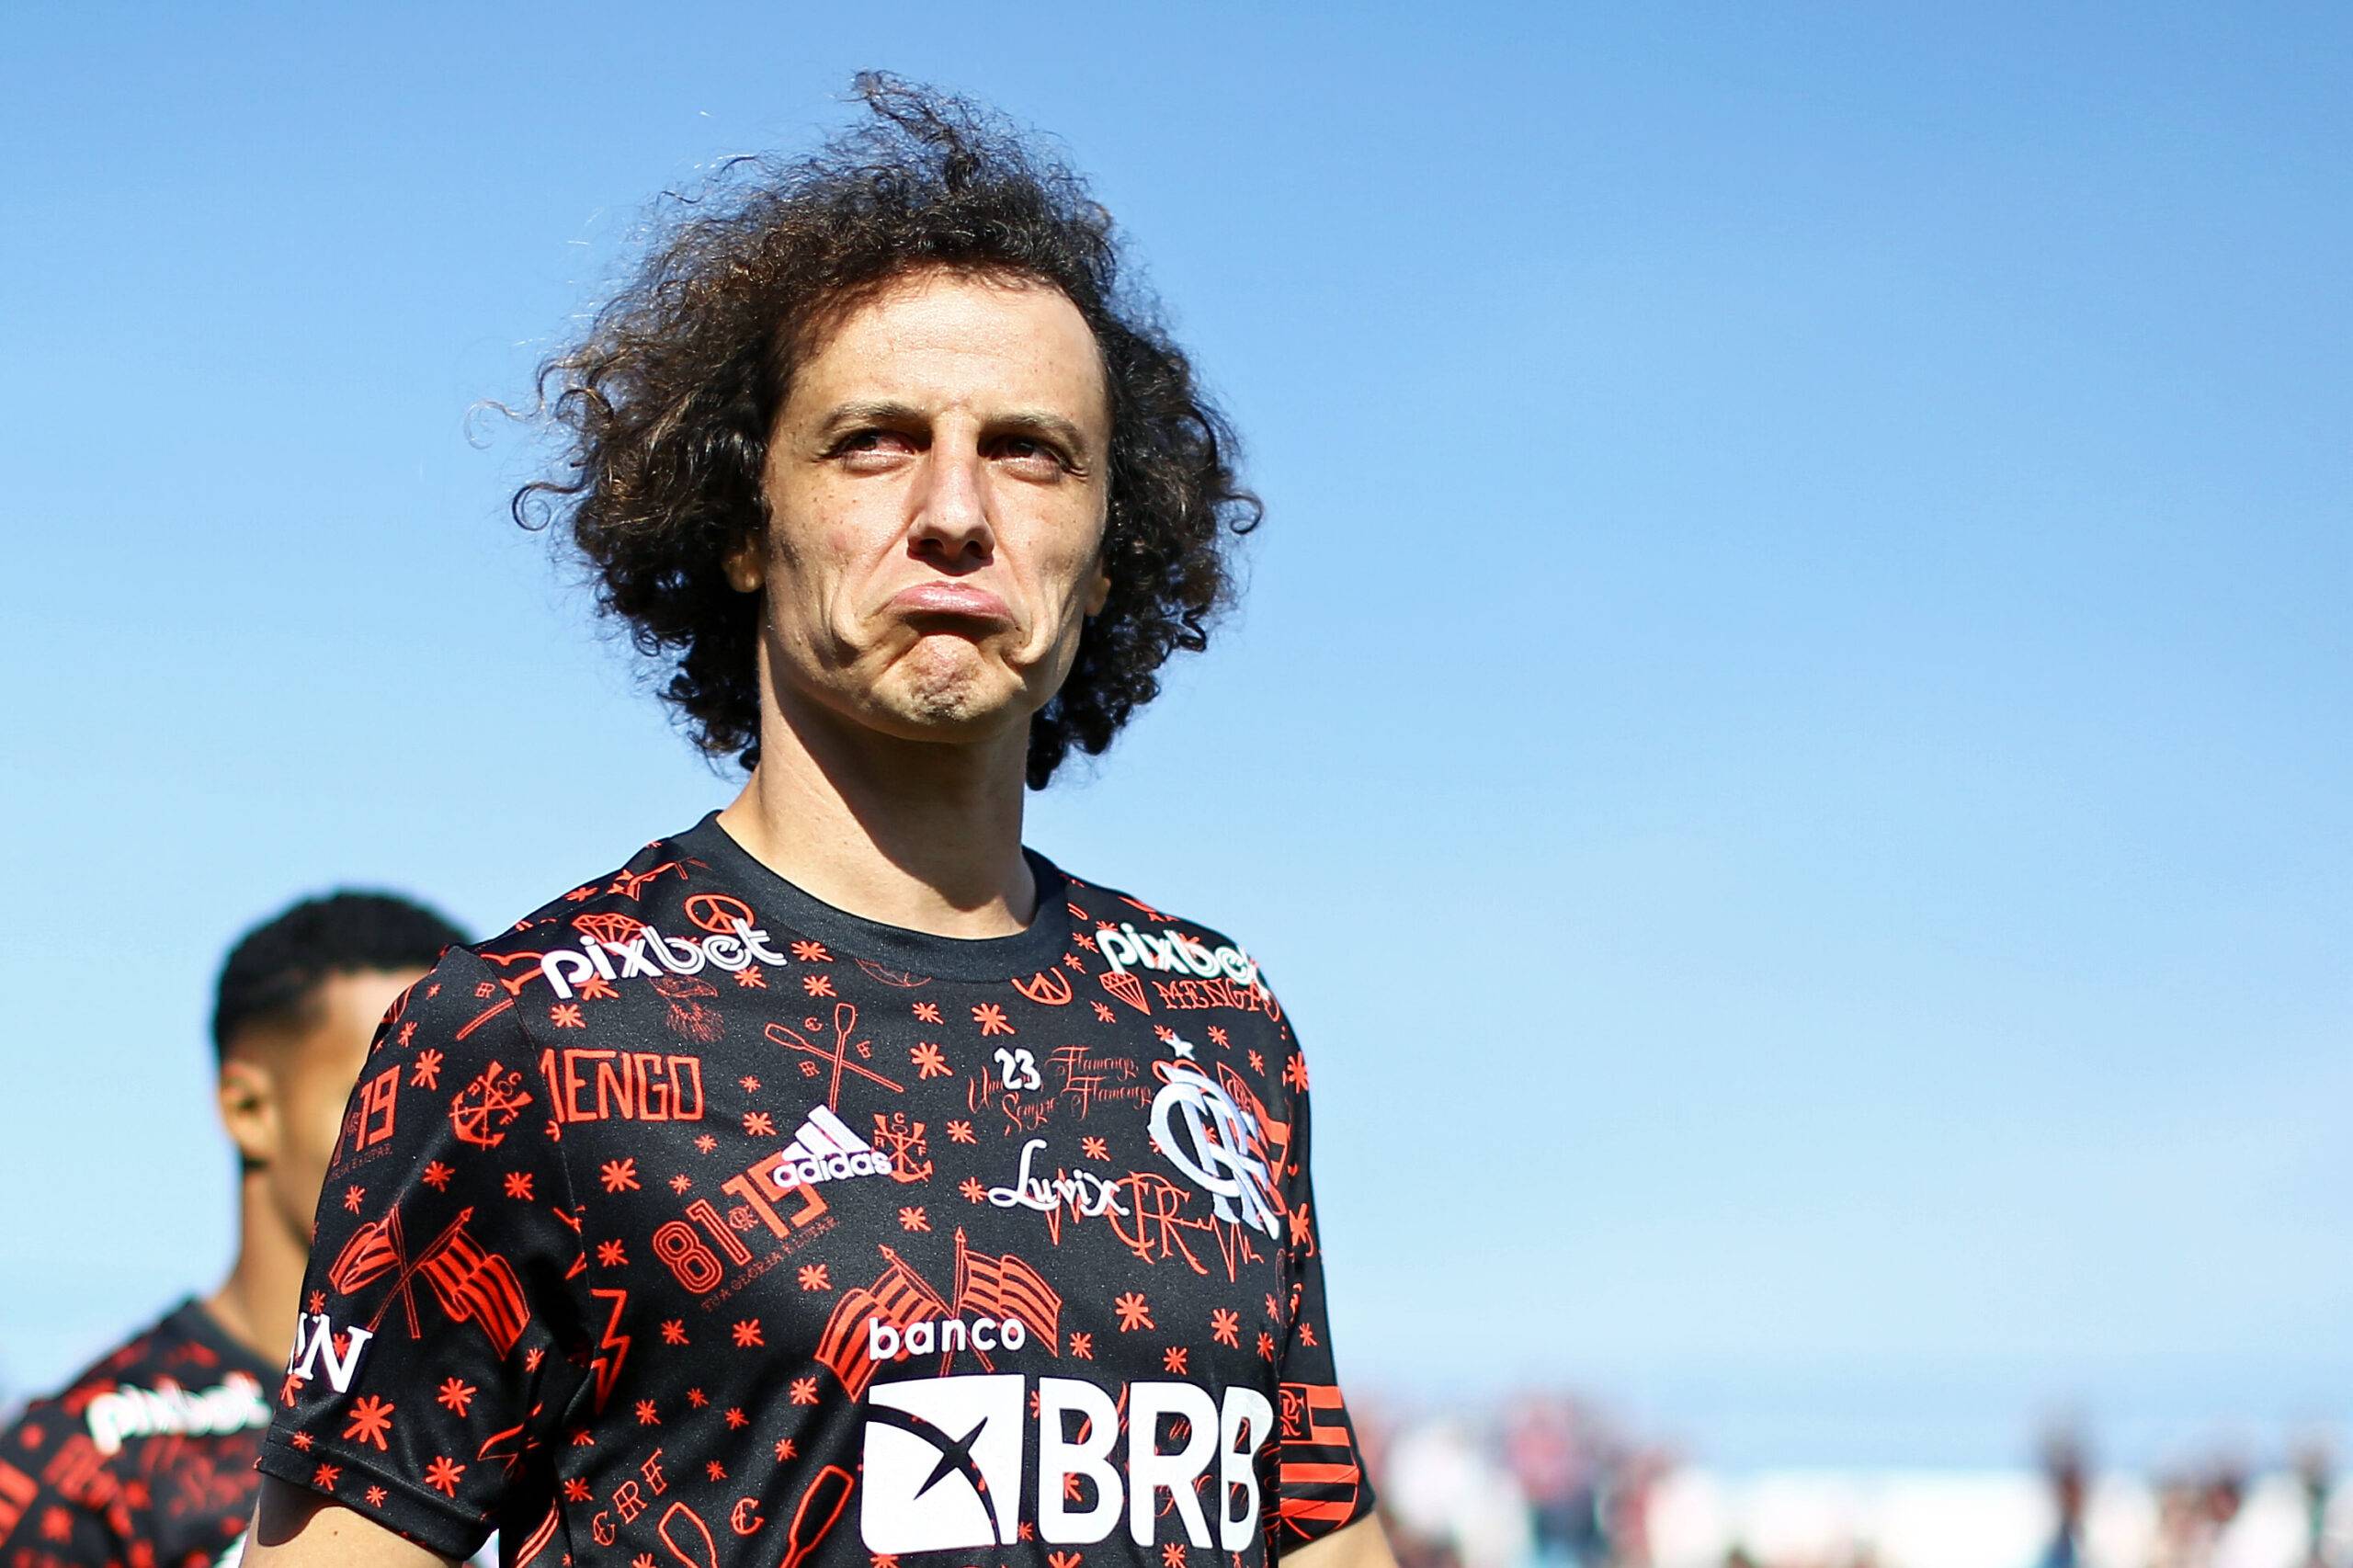 David Luiz, the former Chelsea and Arsenal star, now has a brand new look aged 35